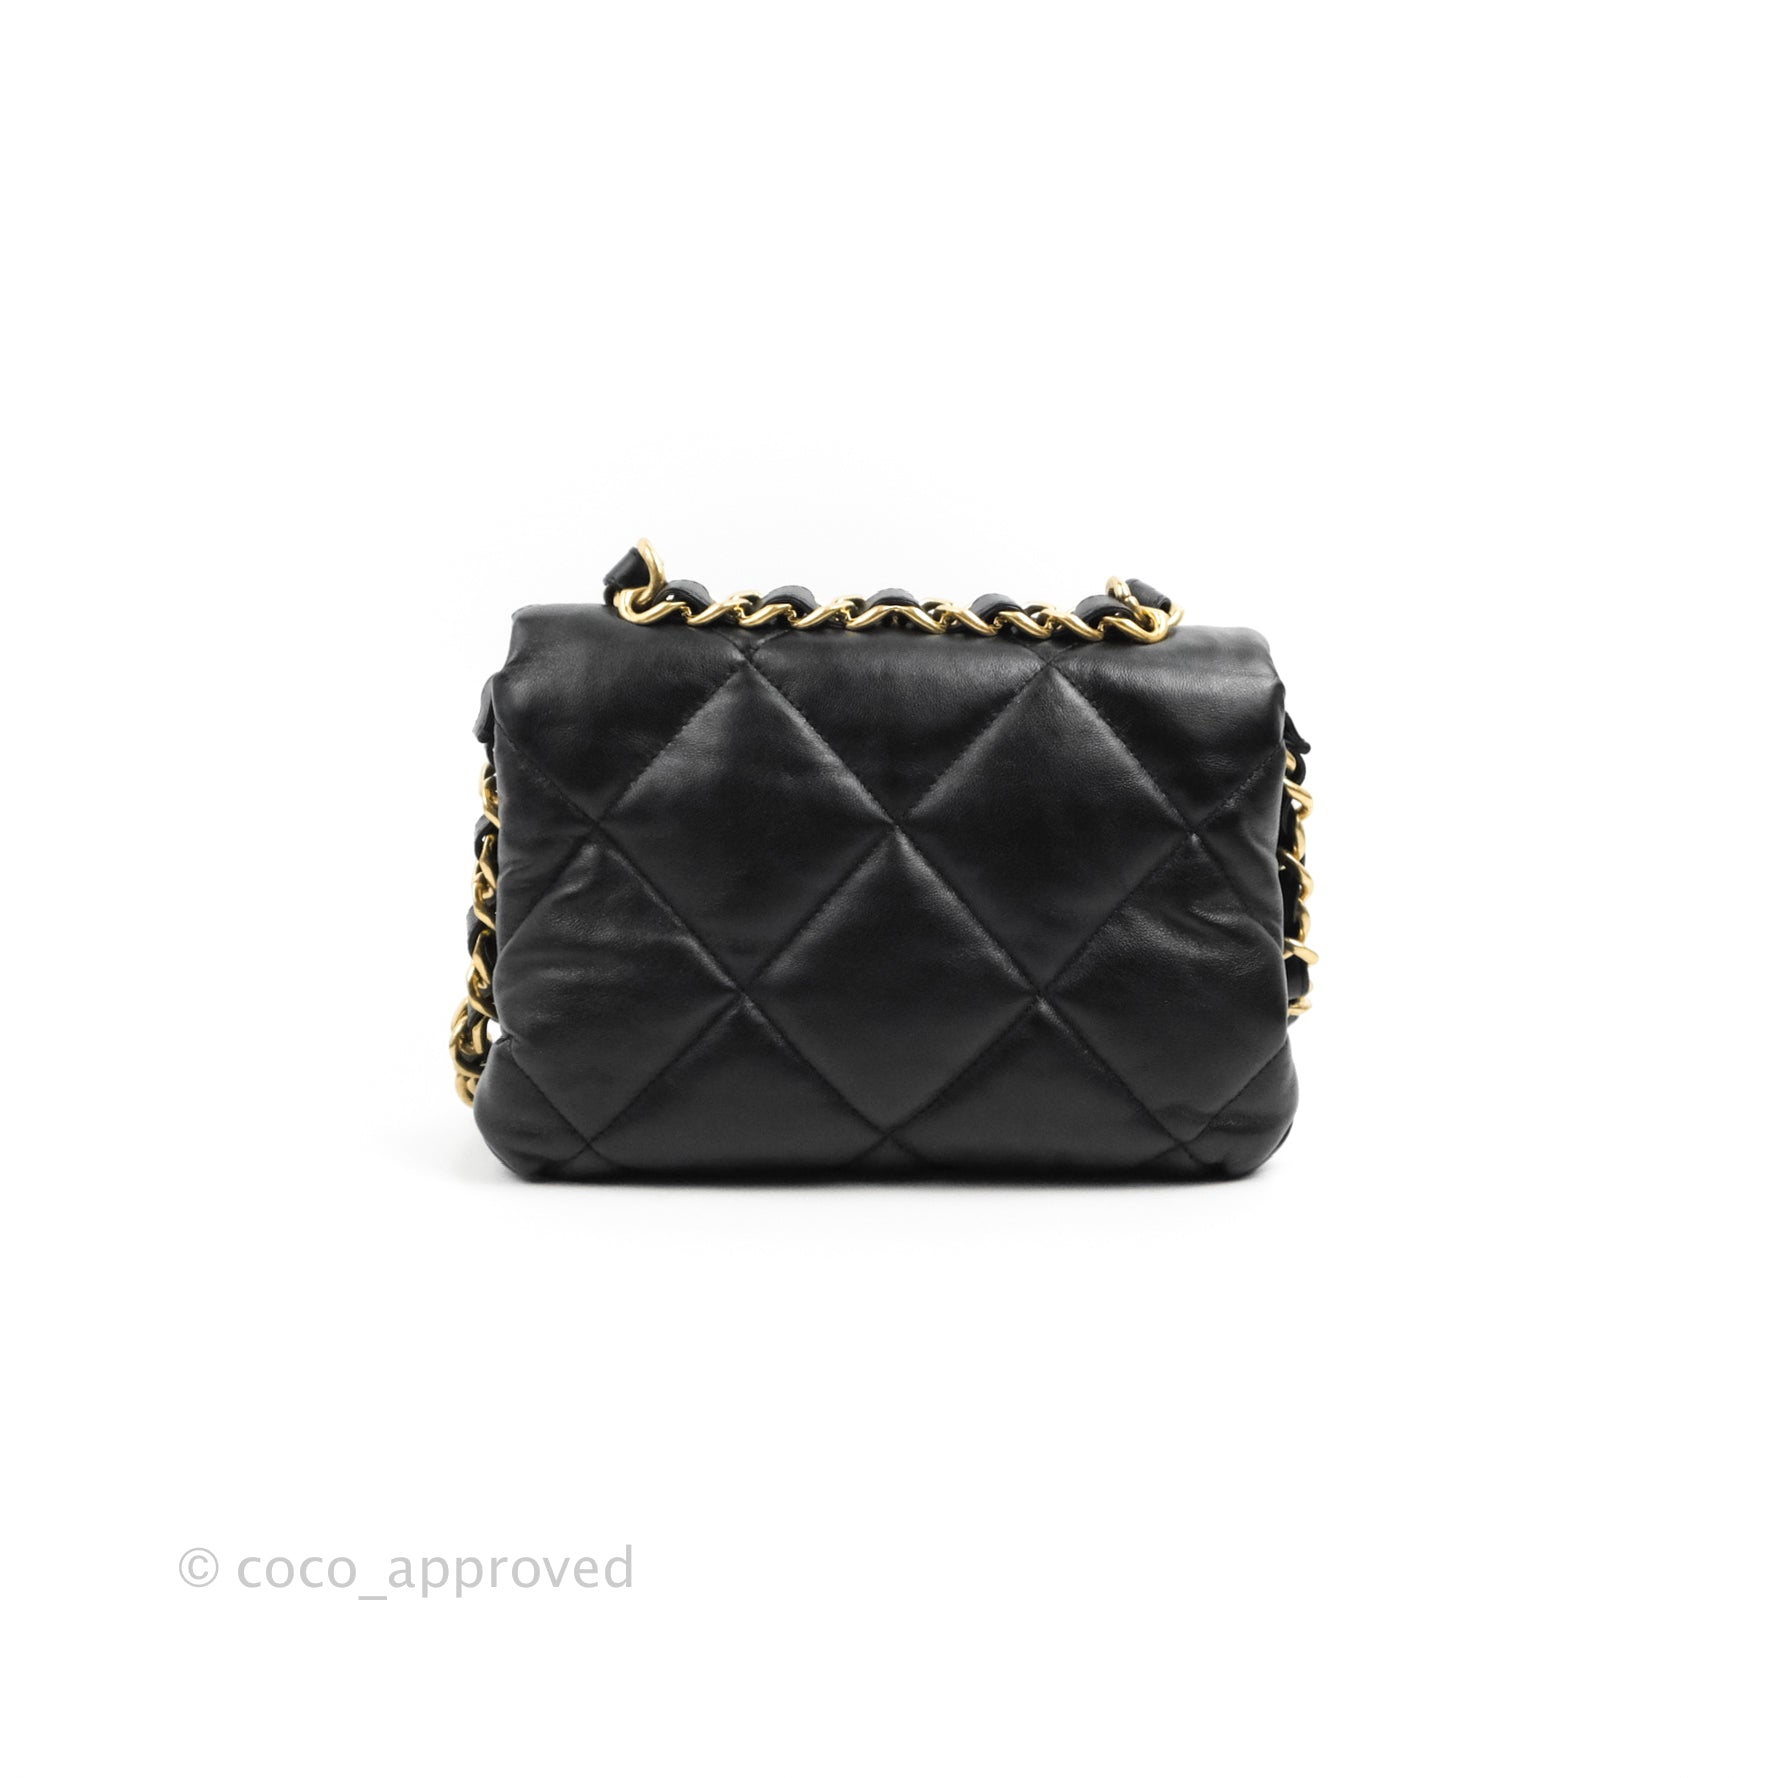 The So Many Chanel Clutch With Chain